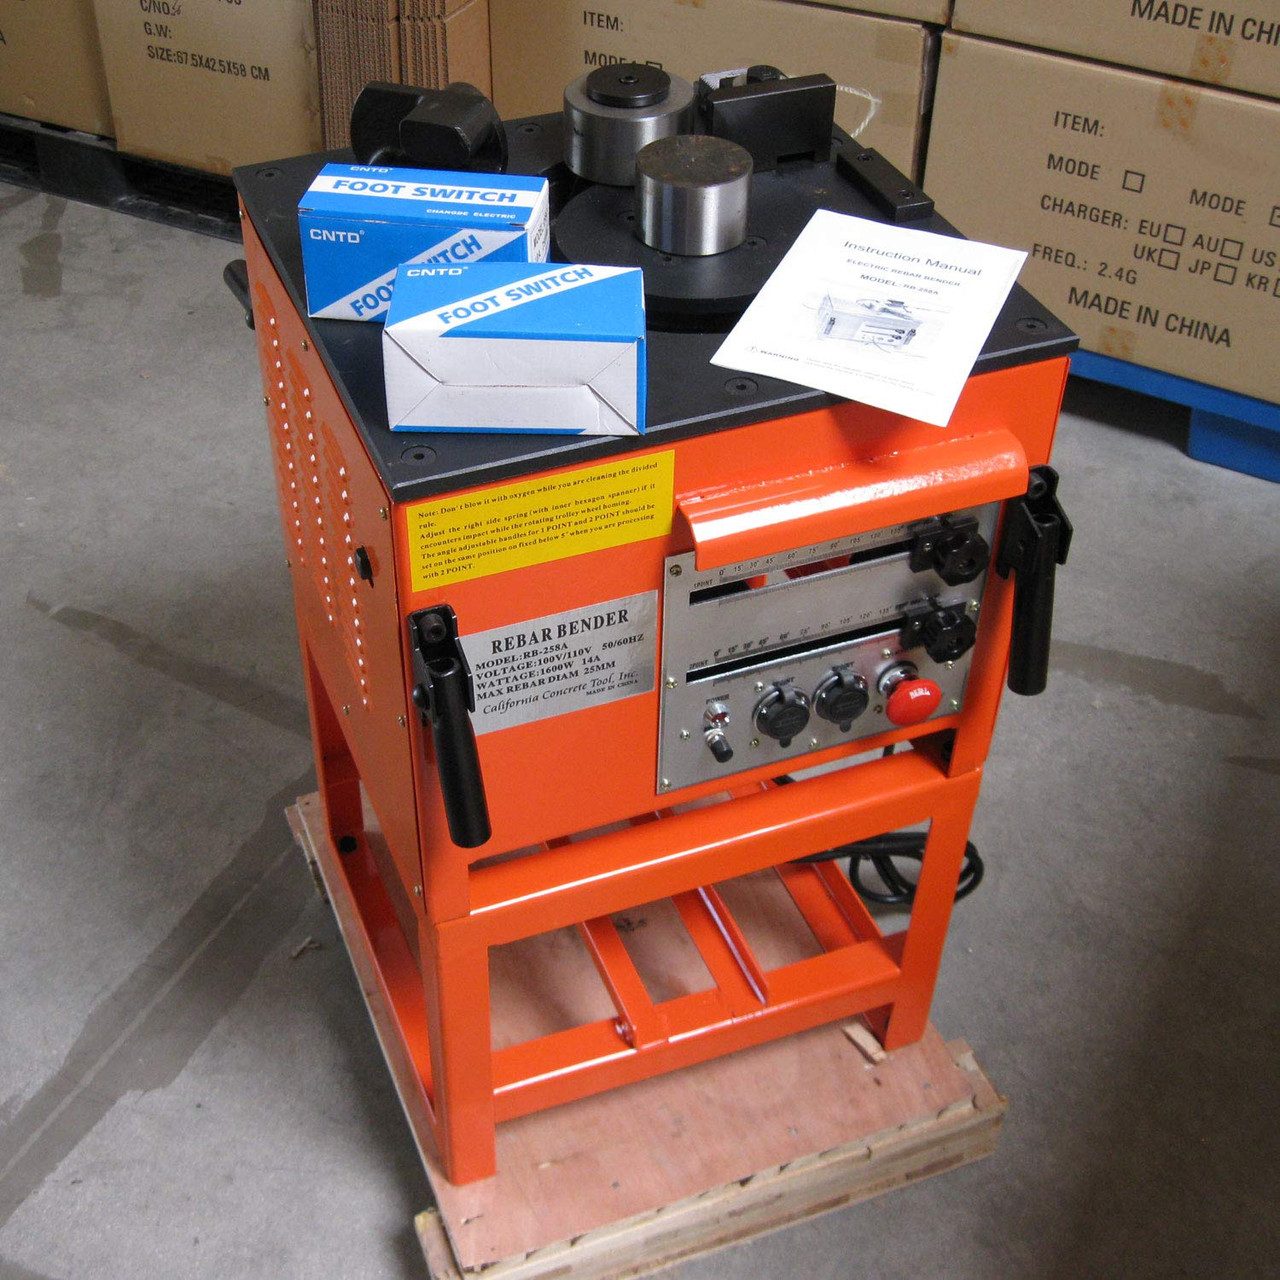 Electric Rebar Bender Bend Up to #8(1 inch) Grade 60 Rebar and Round Bar Model: RB-258A)